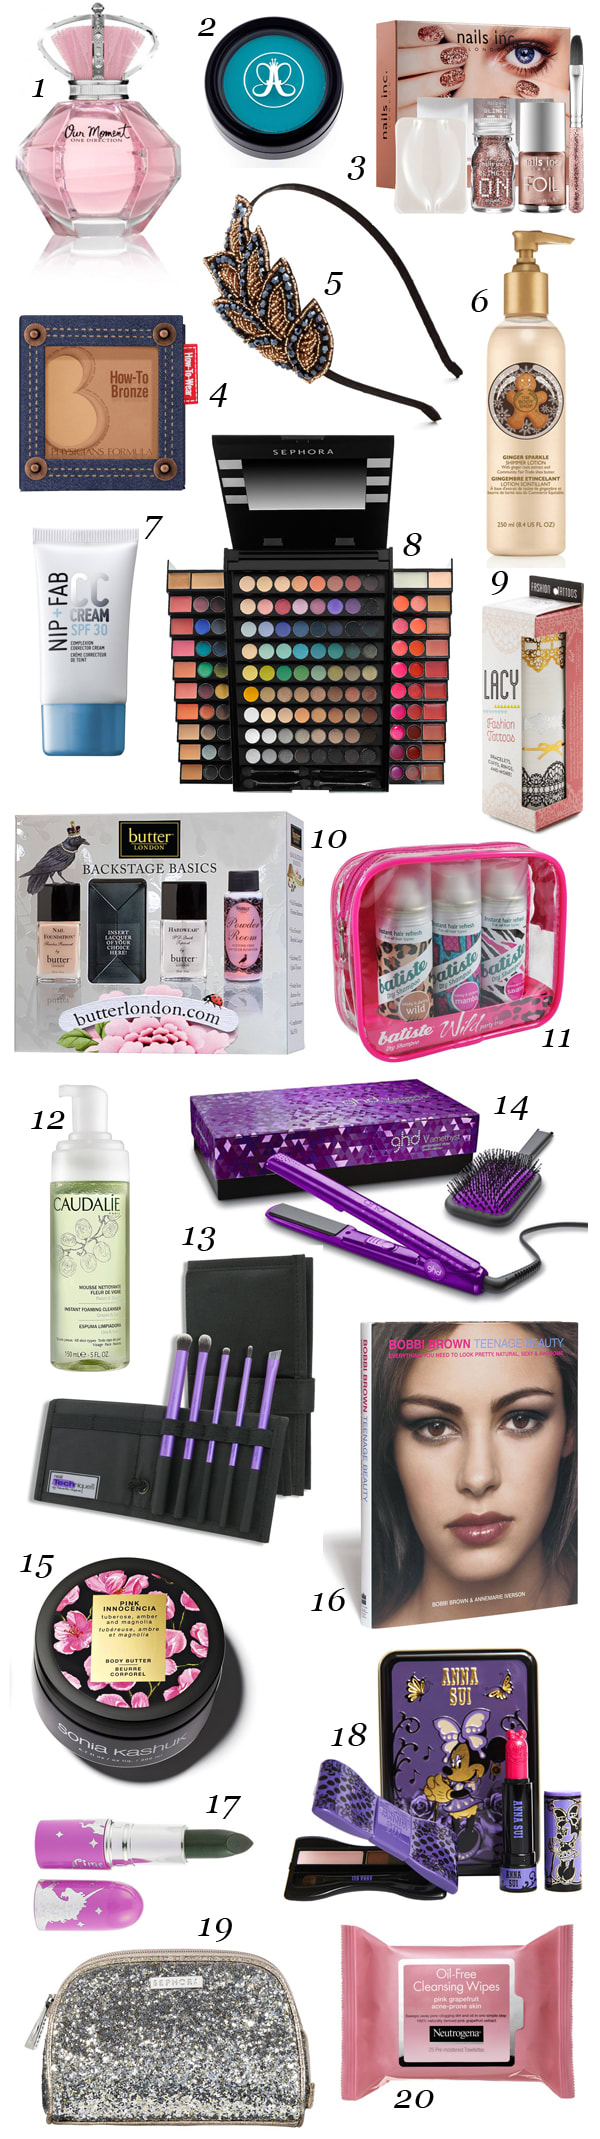 20 Beauty Gift Ideas for Teens and Tweens  Beautyeditor